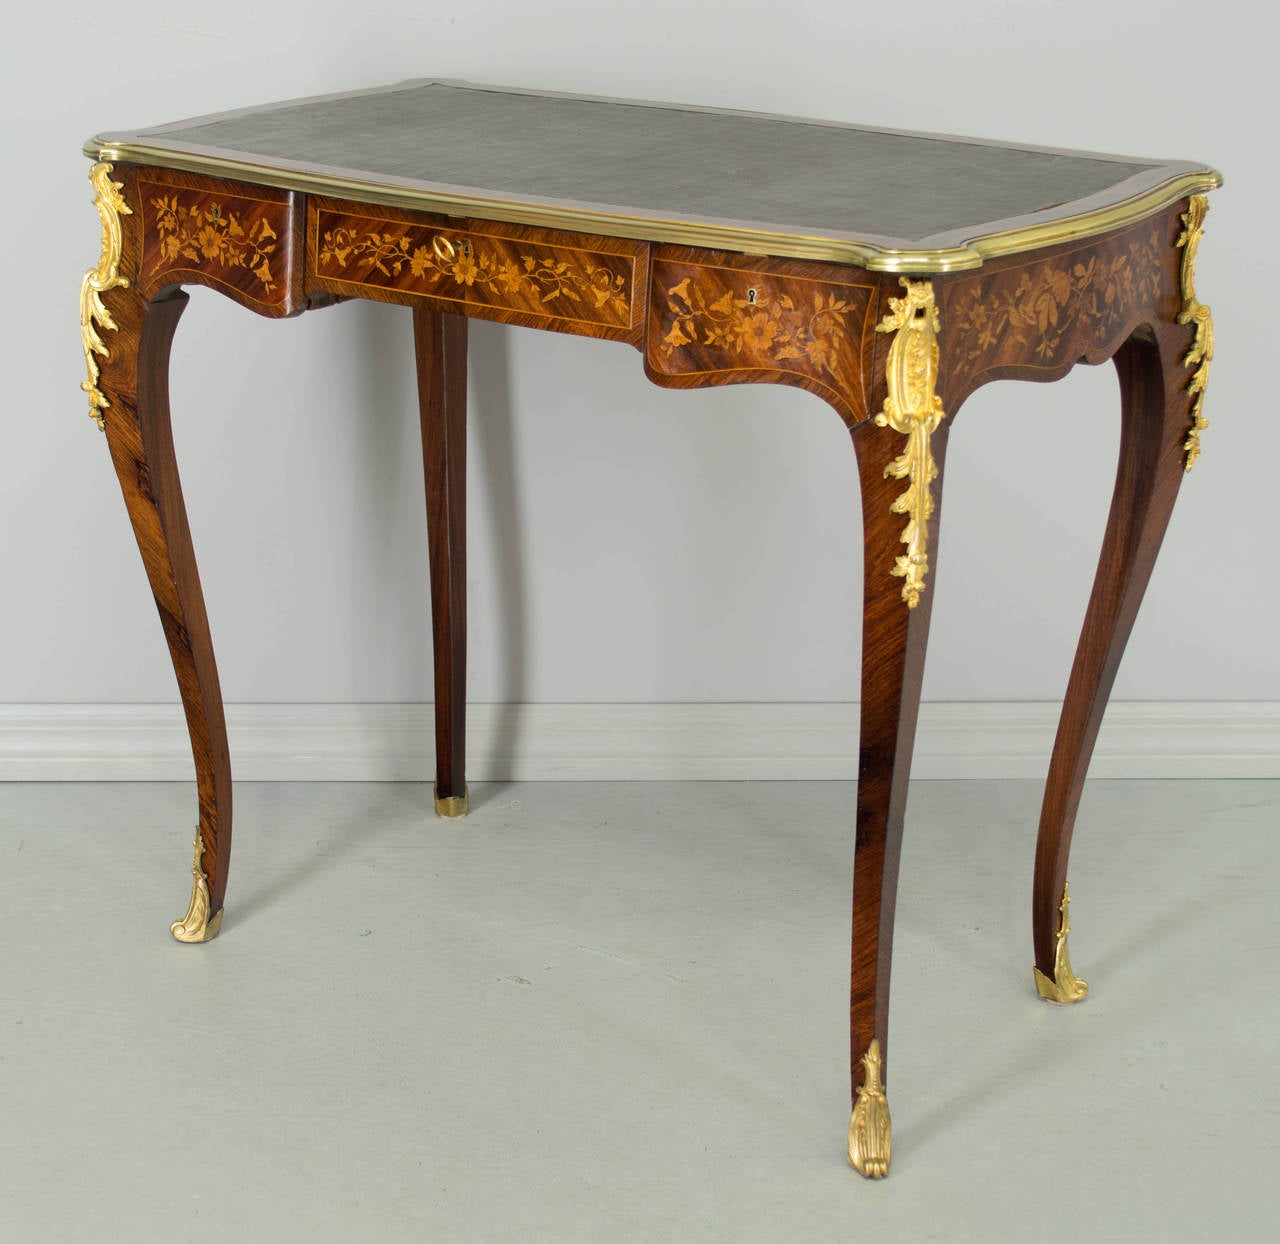 19th century Louis XV style marquetry, gilt bronze mounted ladies desk with three dovetailed drawers. Finished on all four sides with fine floral motif inlay of rosewood and tulipwood on solid mahogany. Elegant slender curved legs with bronze